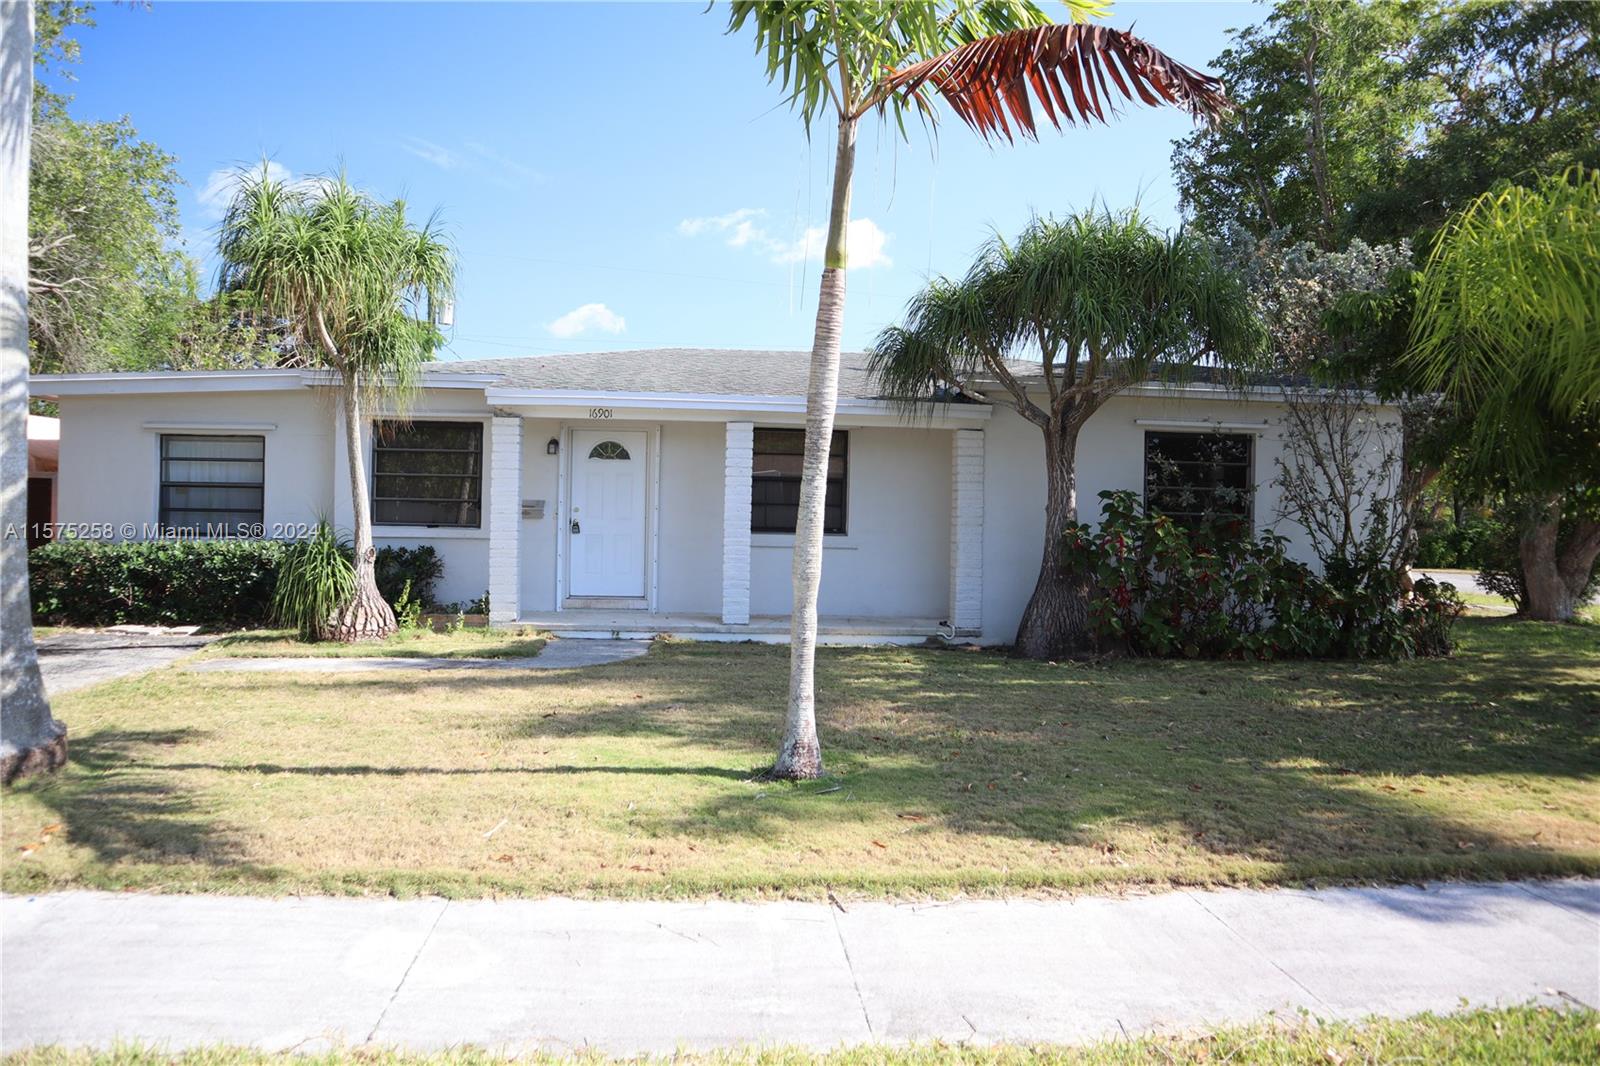 Charming 3 bedroom, 2 bathroom home on a corner lot. This home features a large living area and split bedroom plan with lots of storage. Beautiful open Florida room overlooking back yard.  Roof is approximately 6 years old and new a/c last year. No HOA.